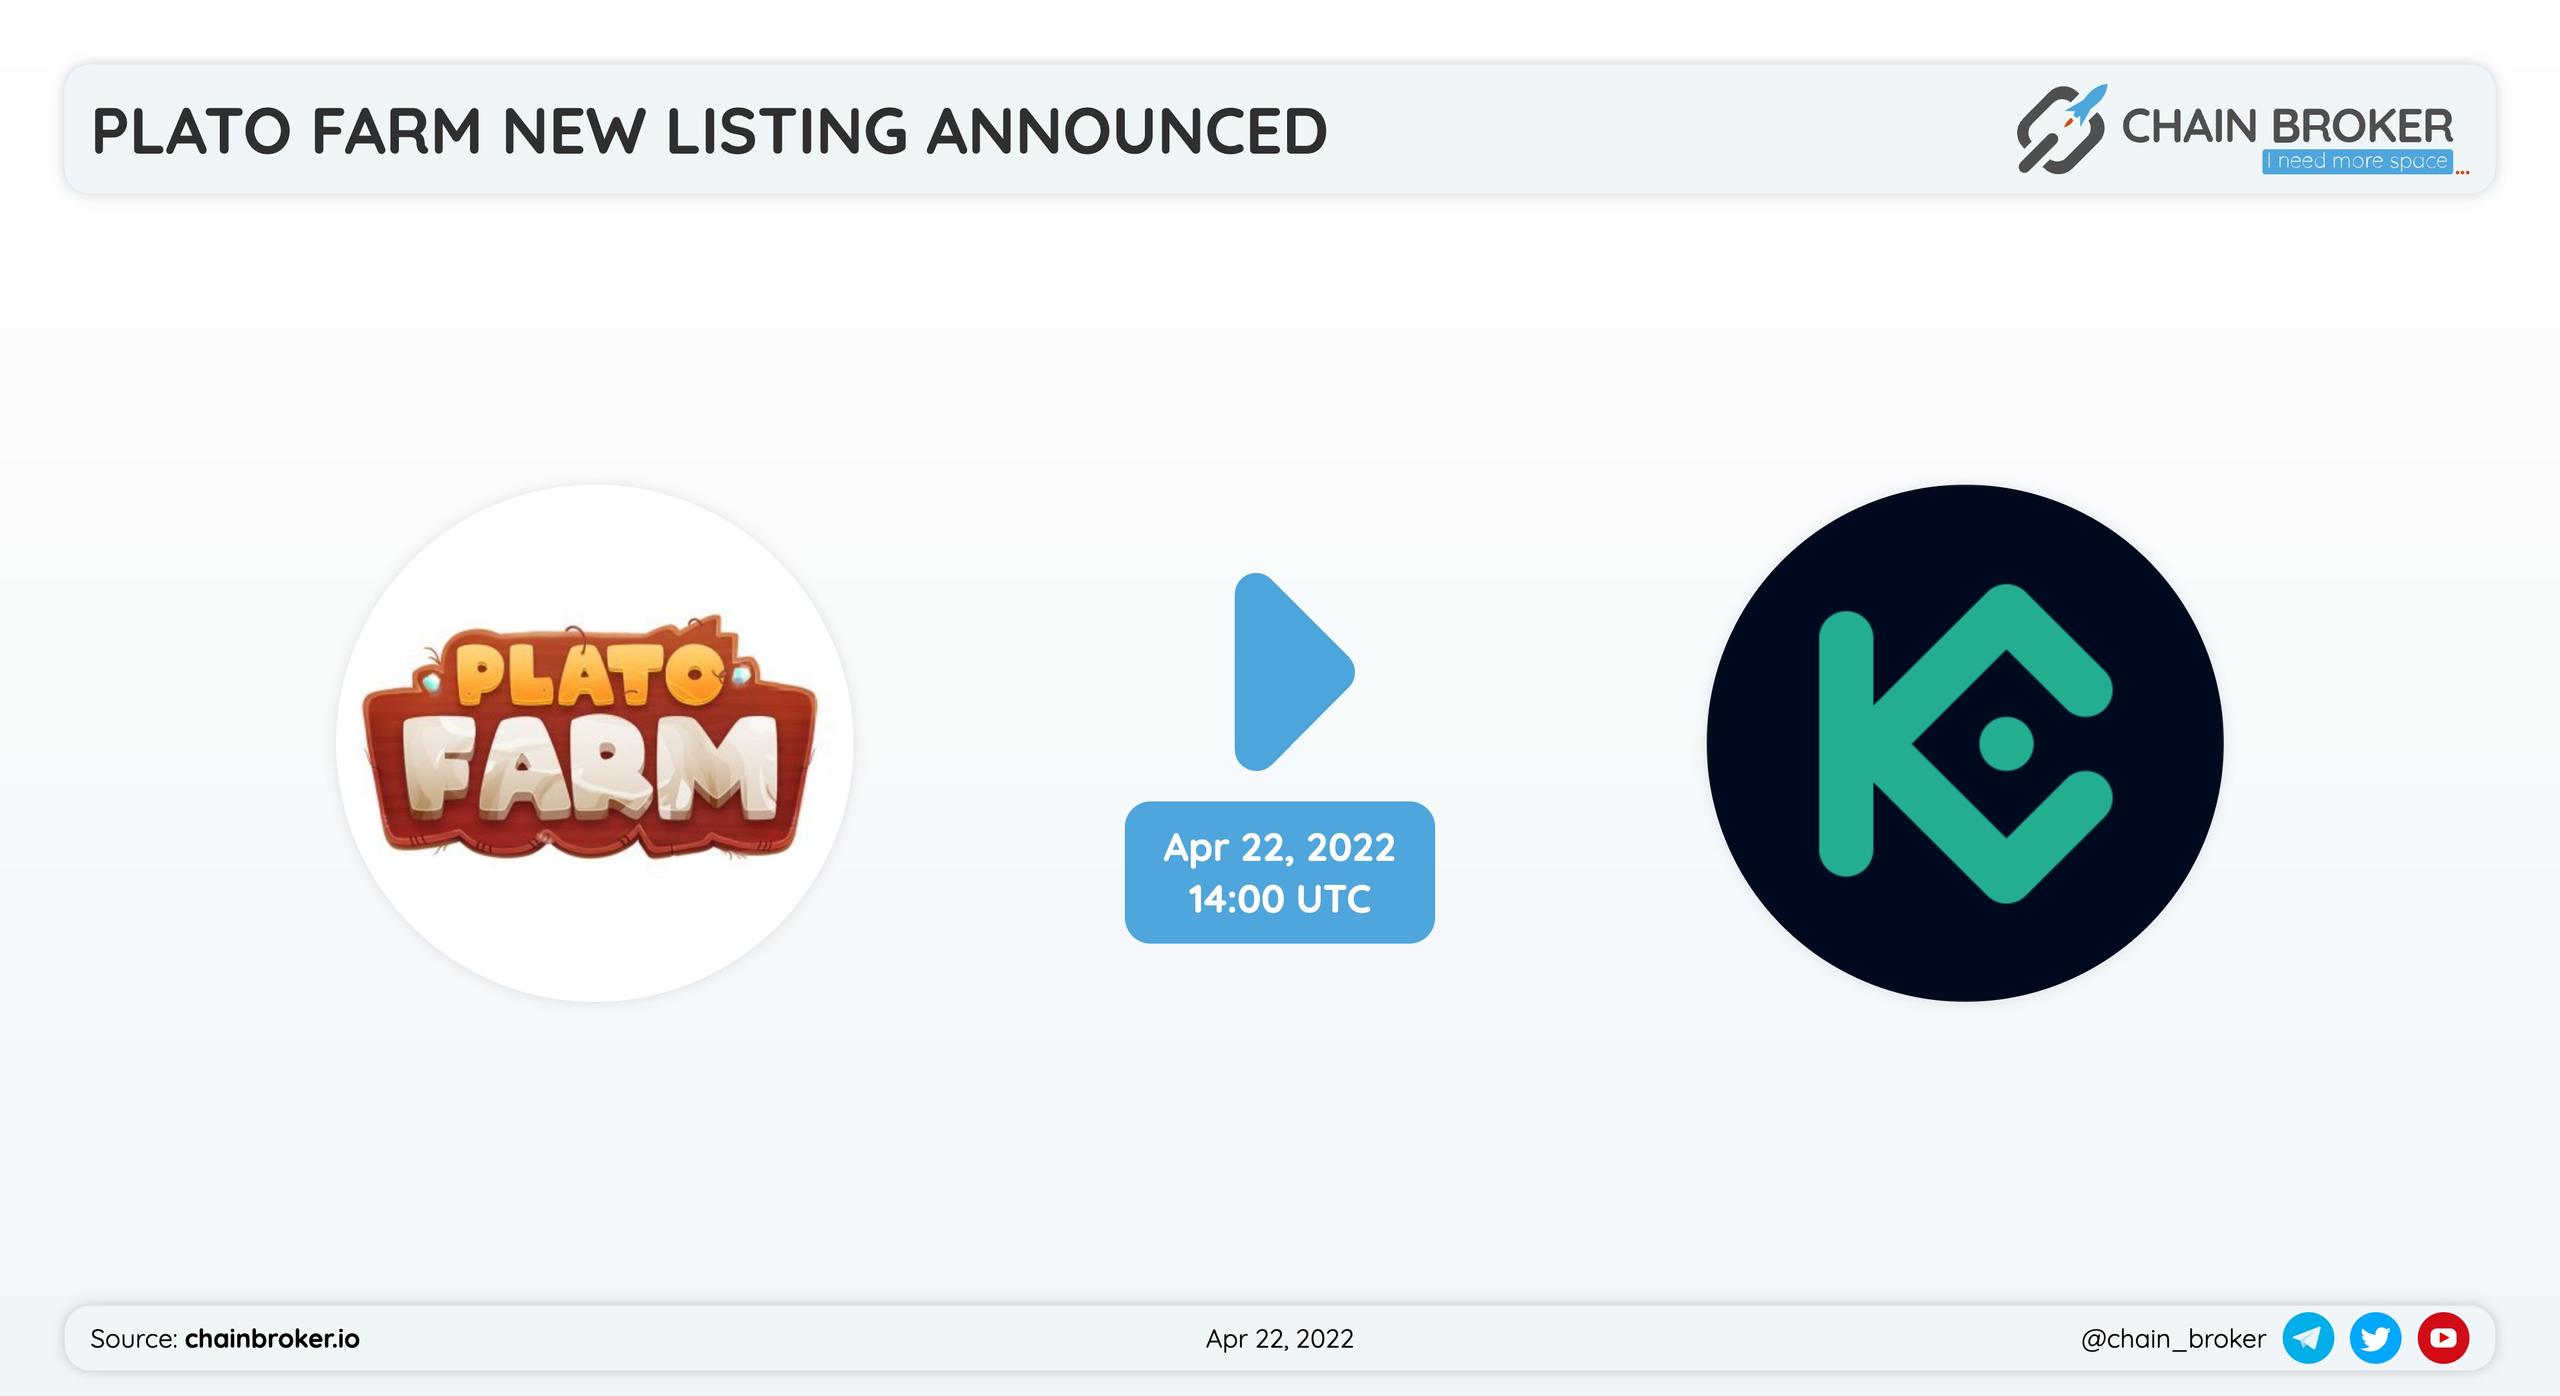 Plato Farm has partnered with Kucoin for a token listing.